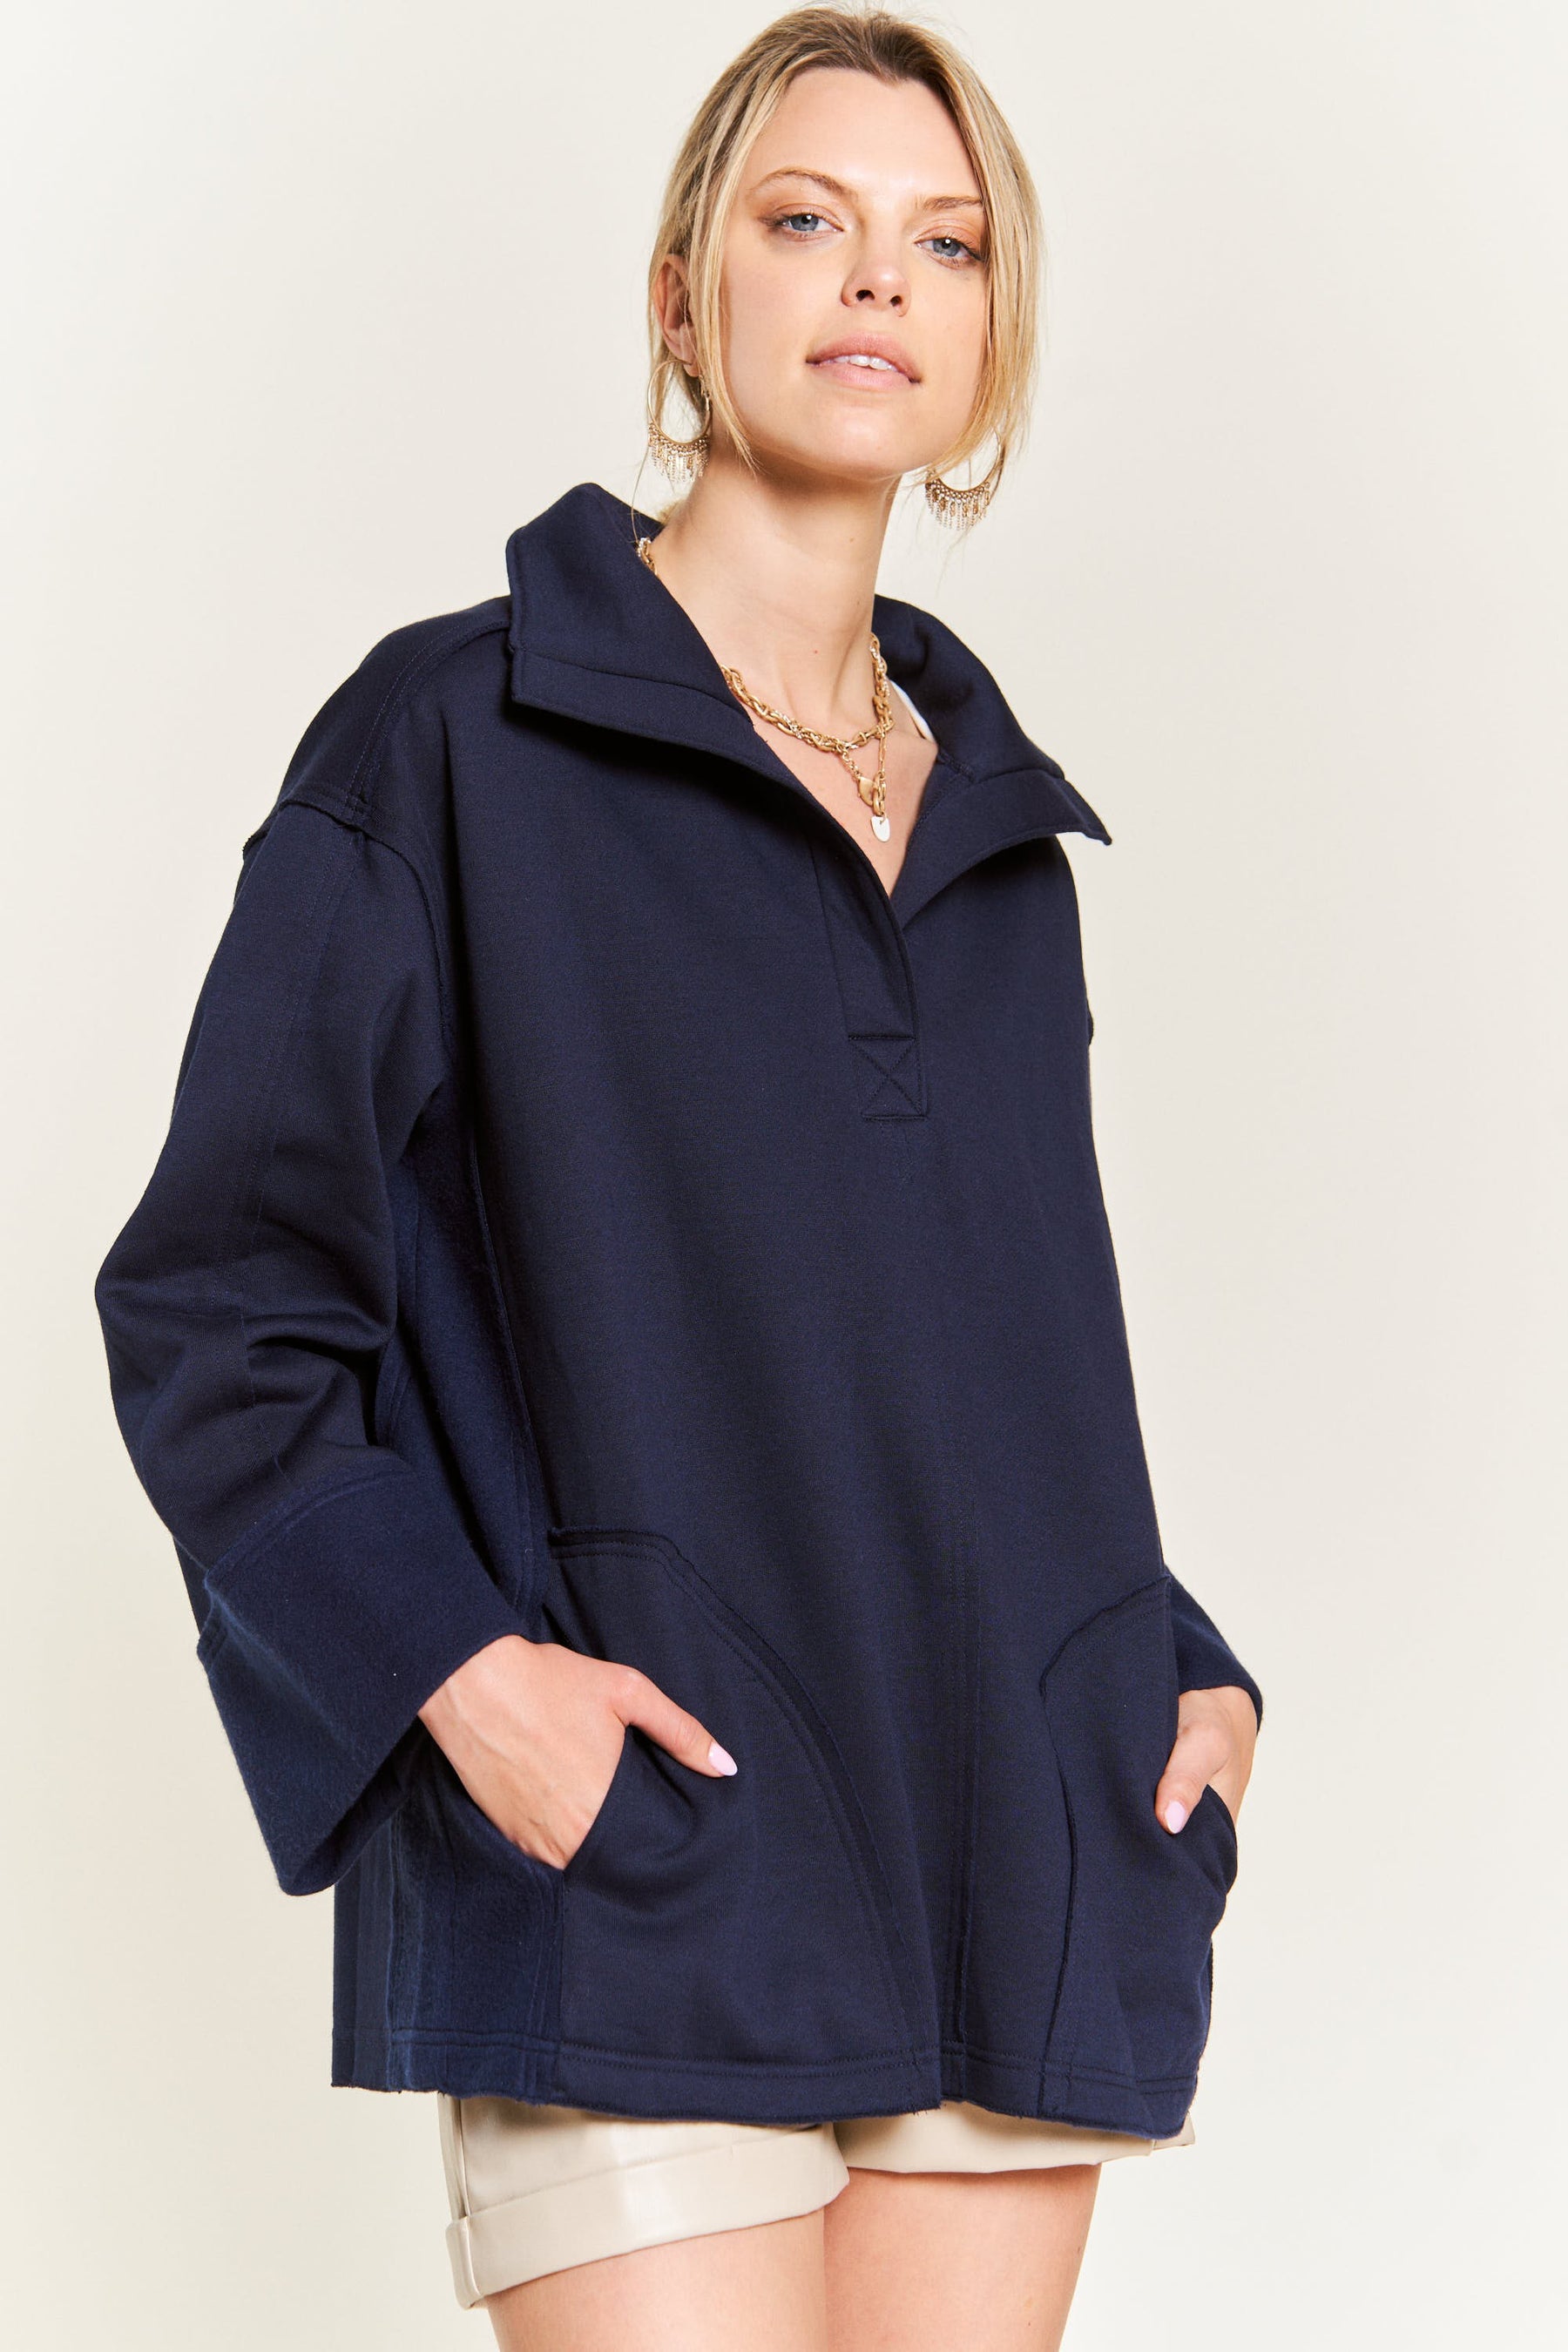 Together At Last Collared Pullover - Navy